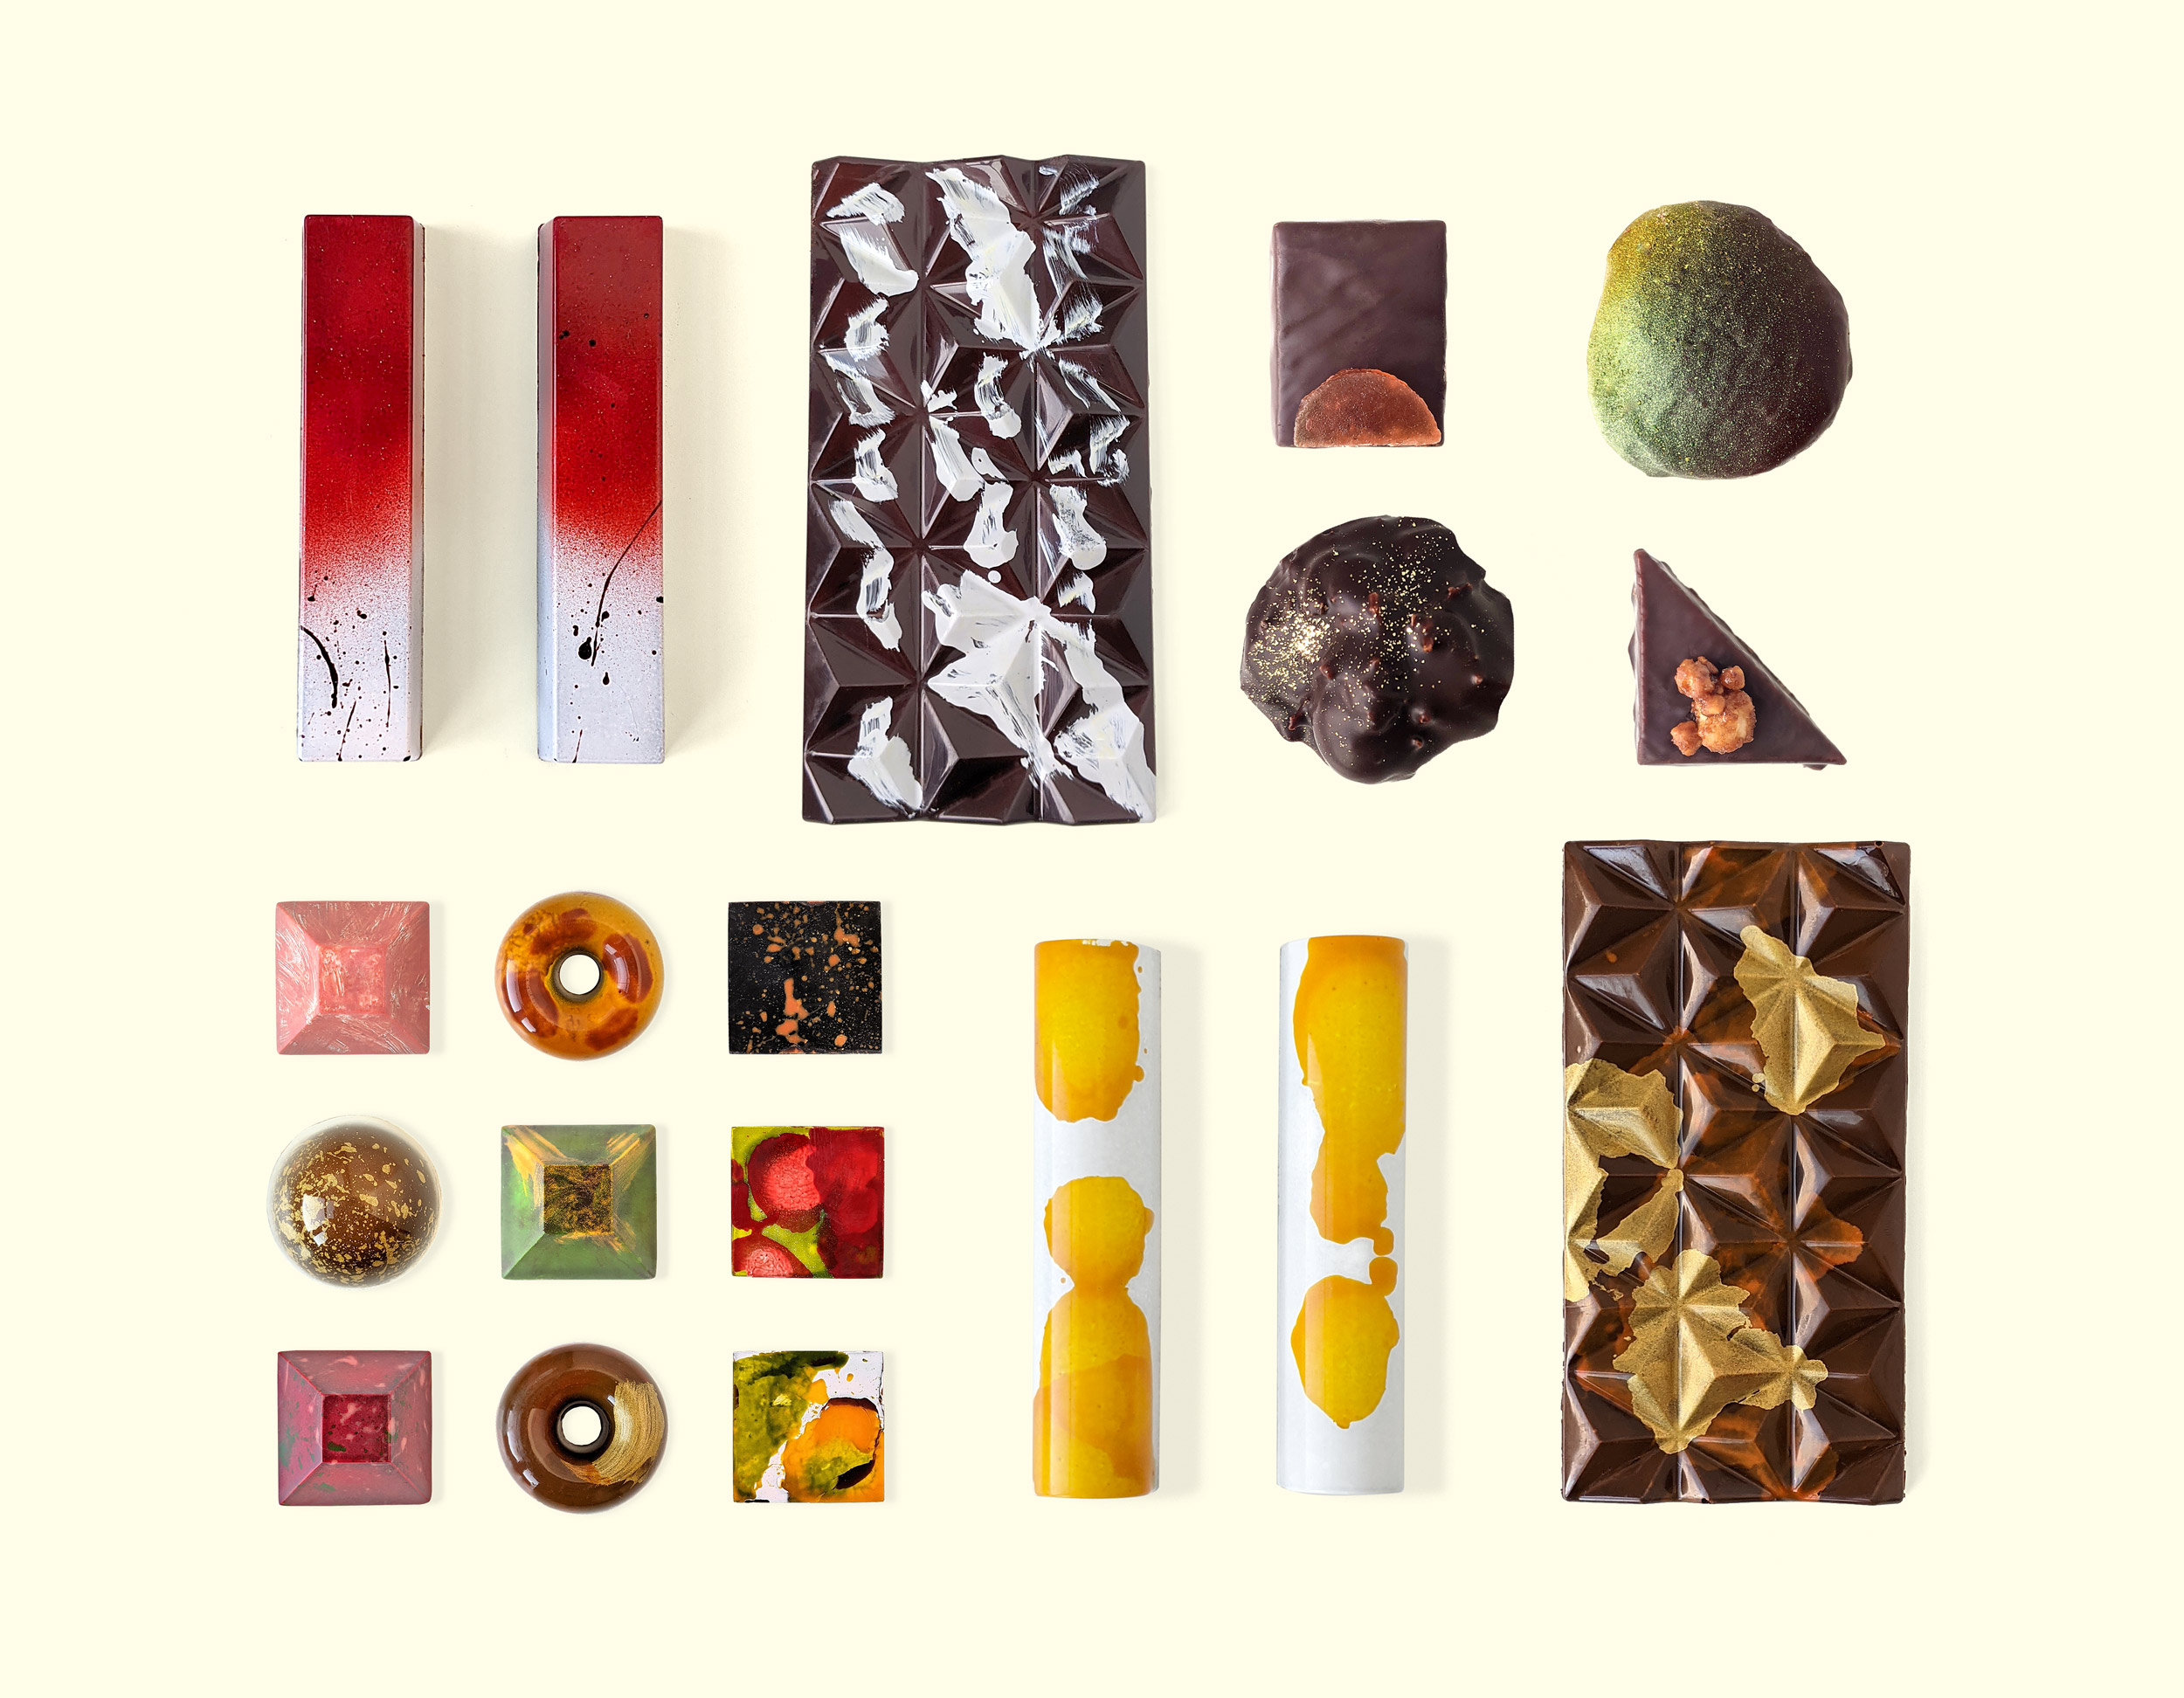 An array of artistic chocolates from Topopgato including bars, squares, doughnut-shaped chocolates and more.